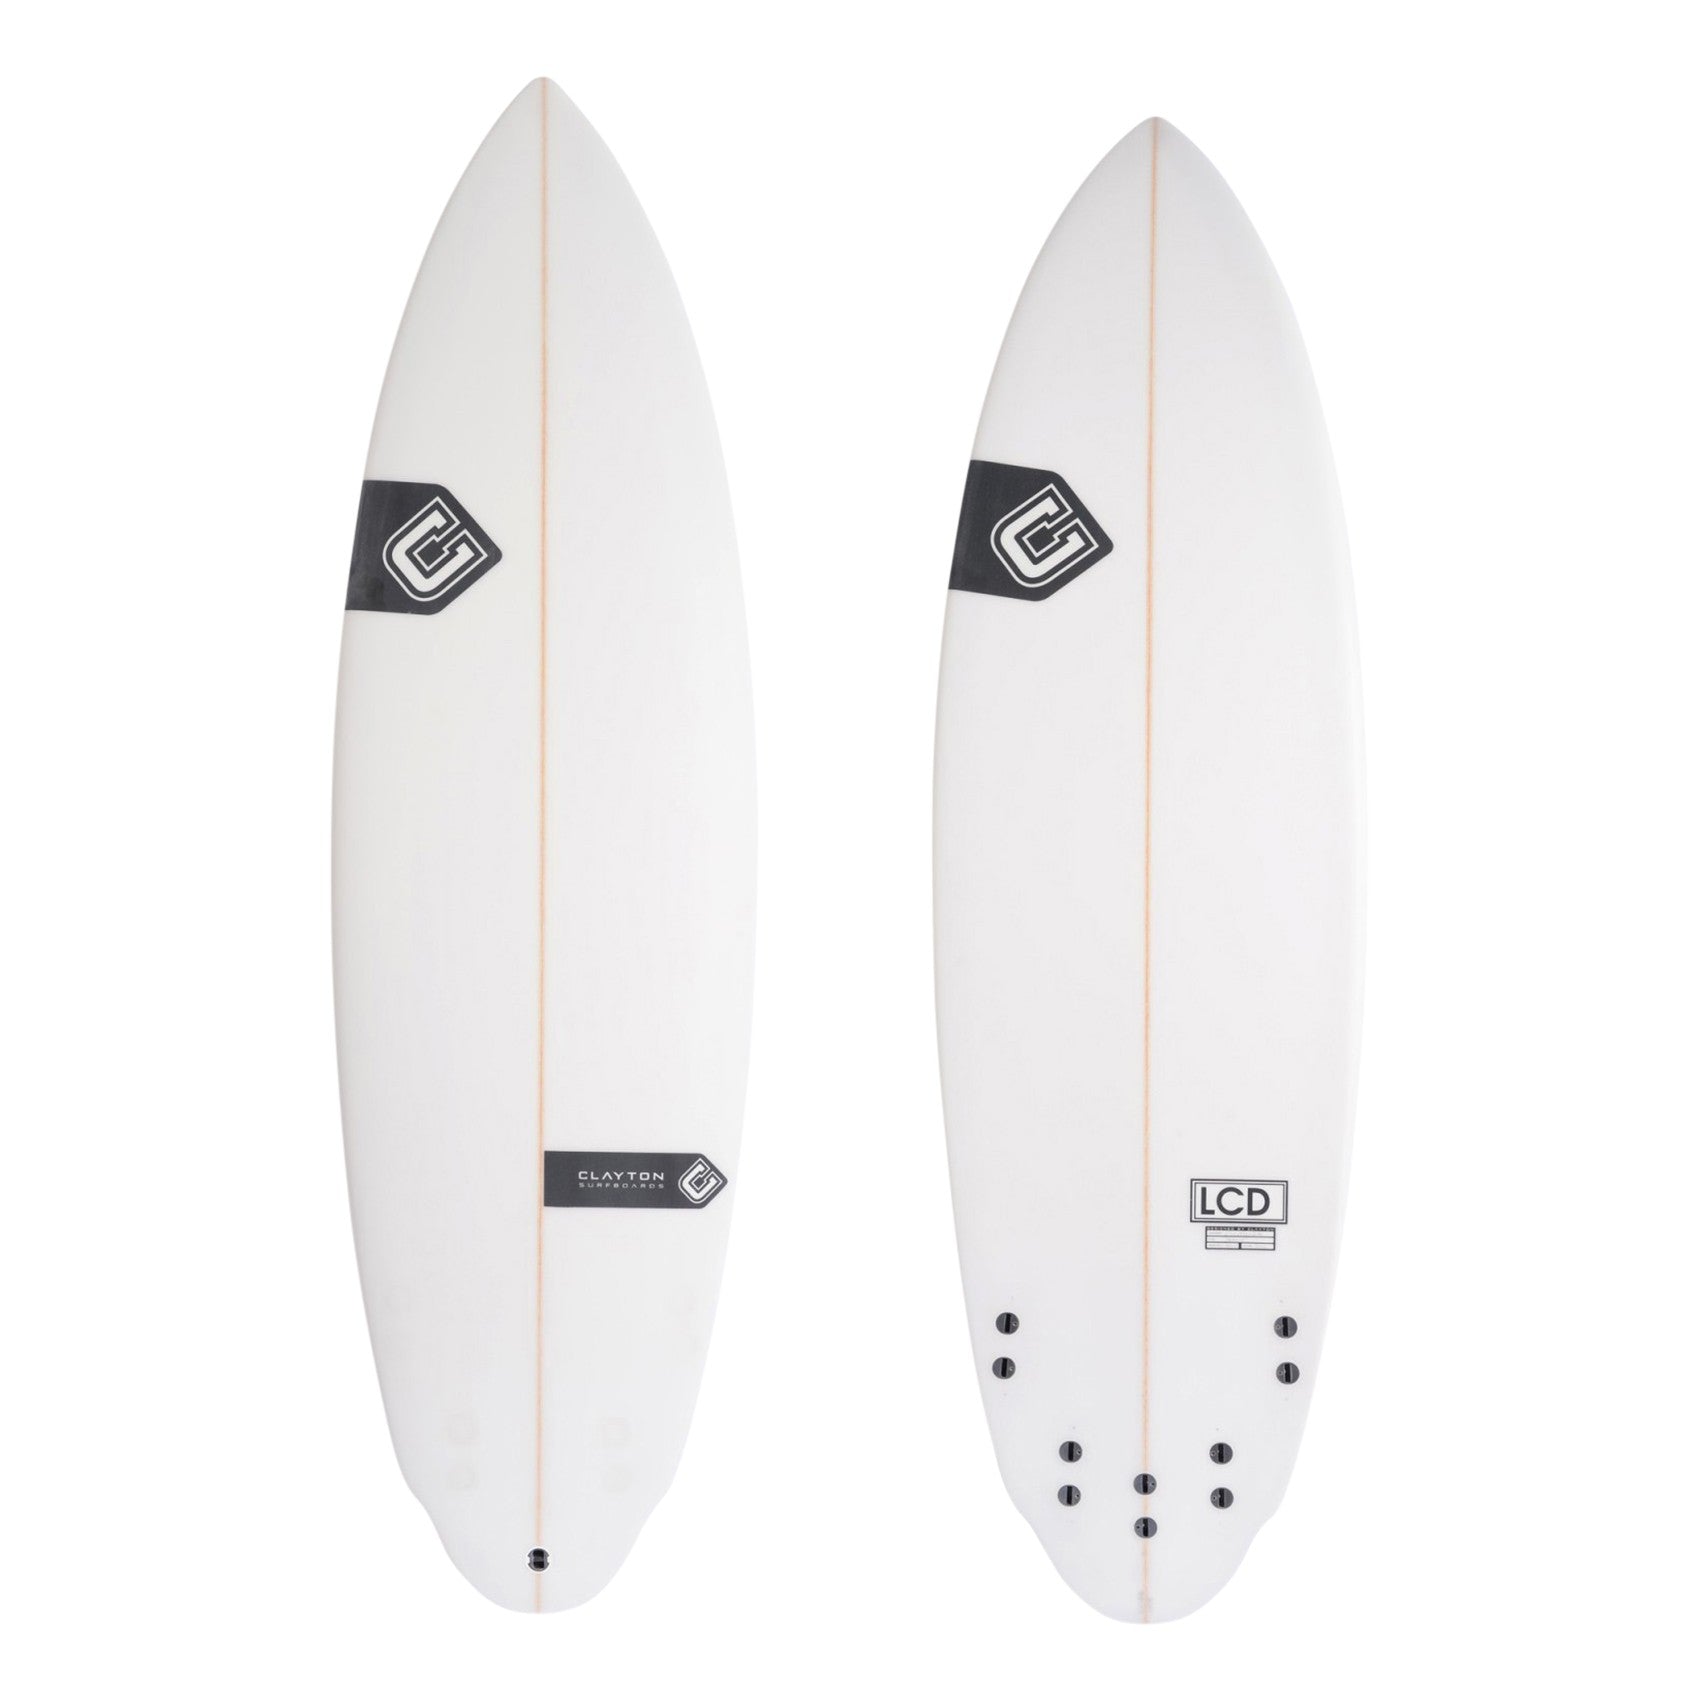 CLAYTON Surfboards - LCD (5 fins) (PU)